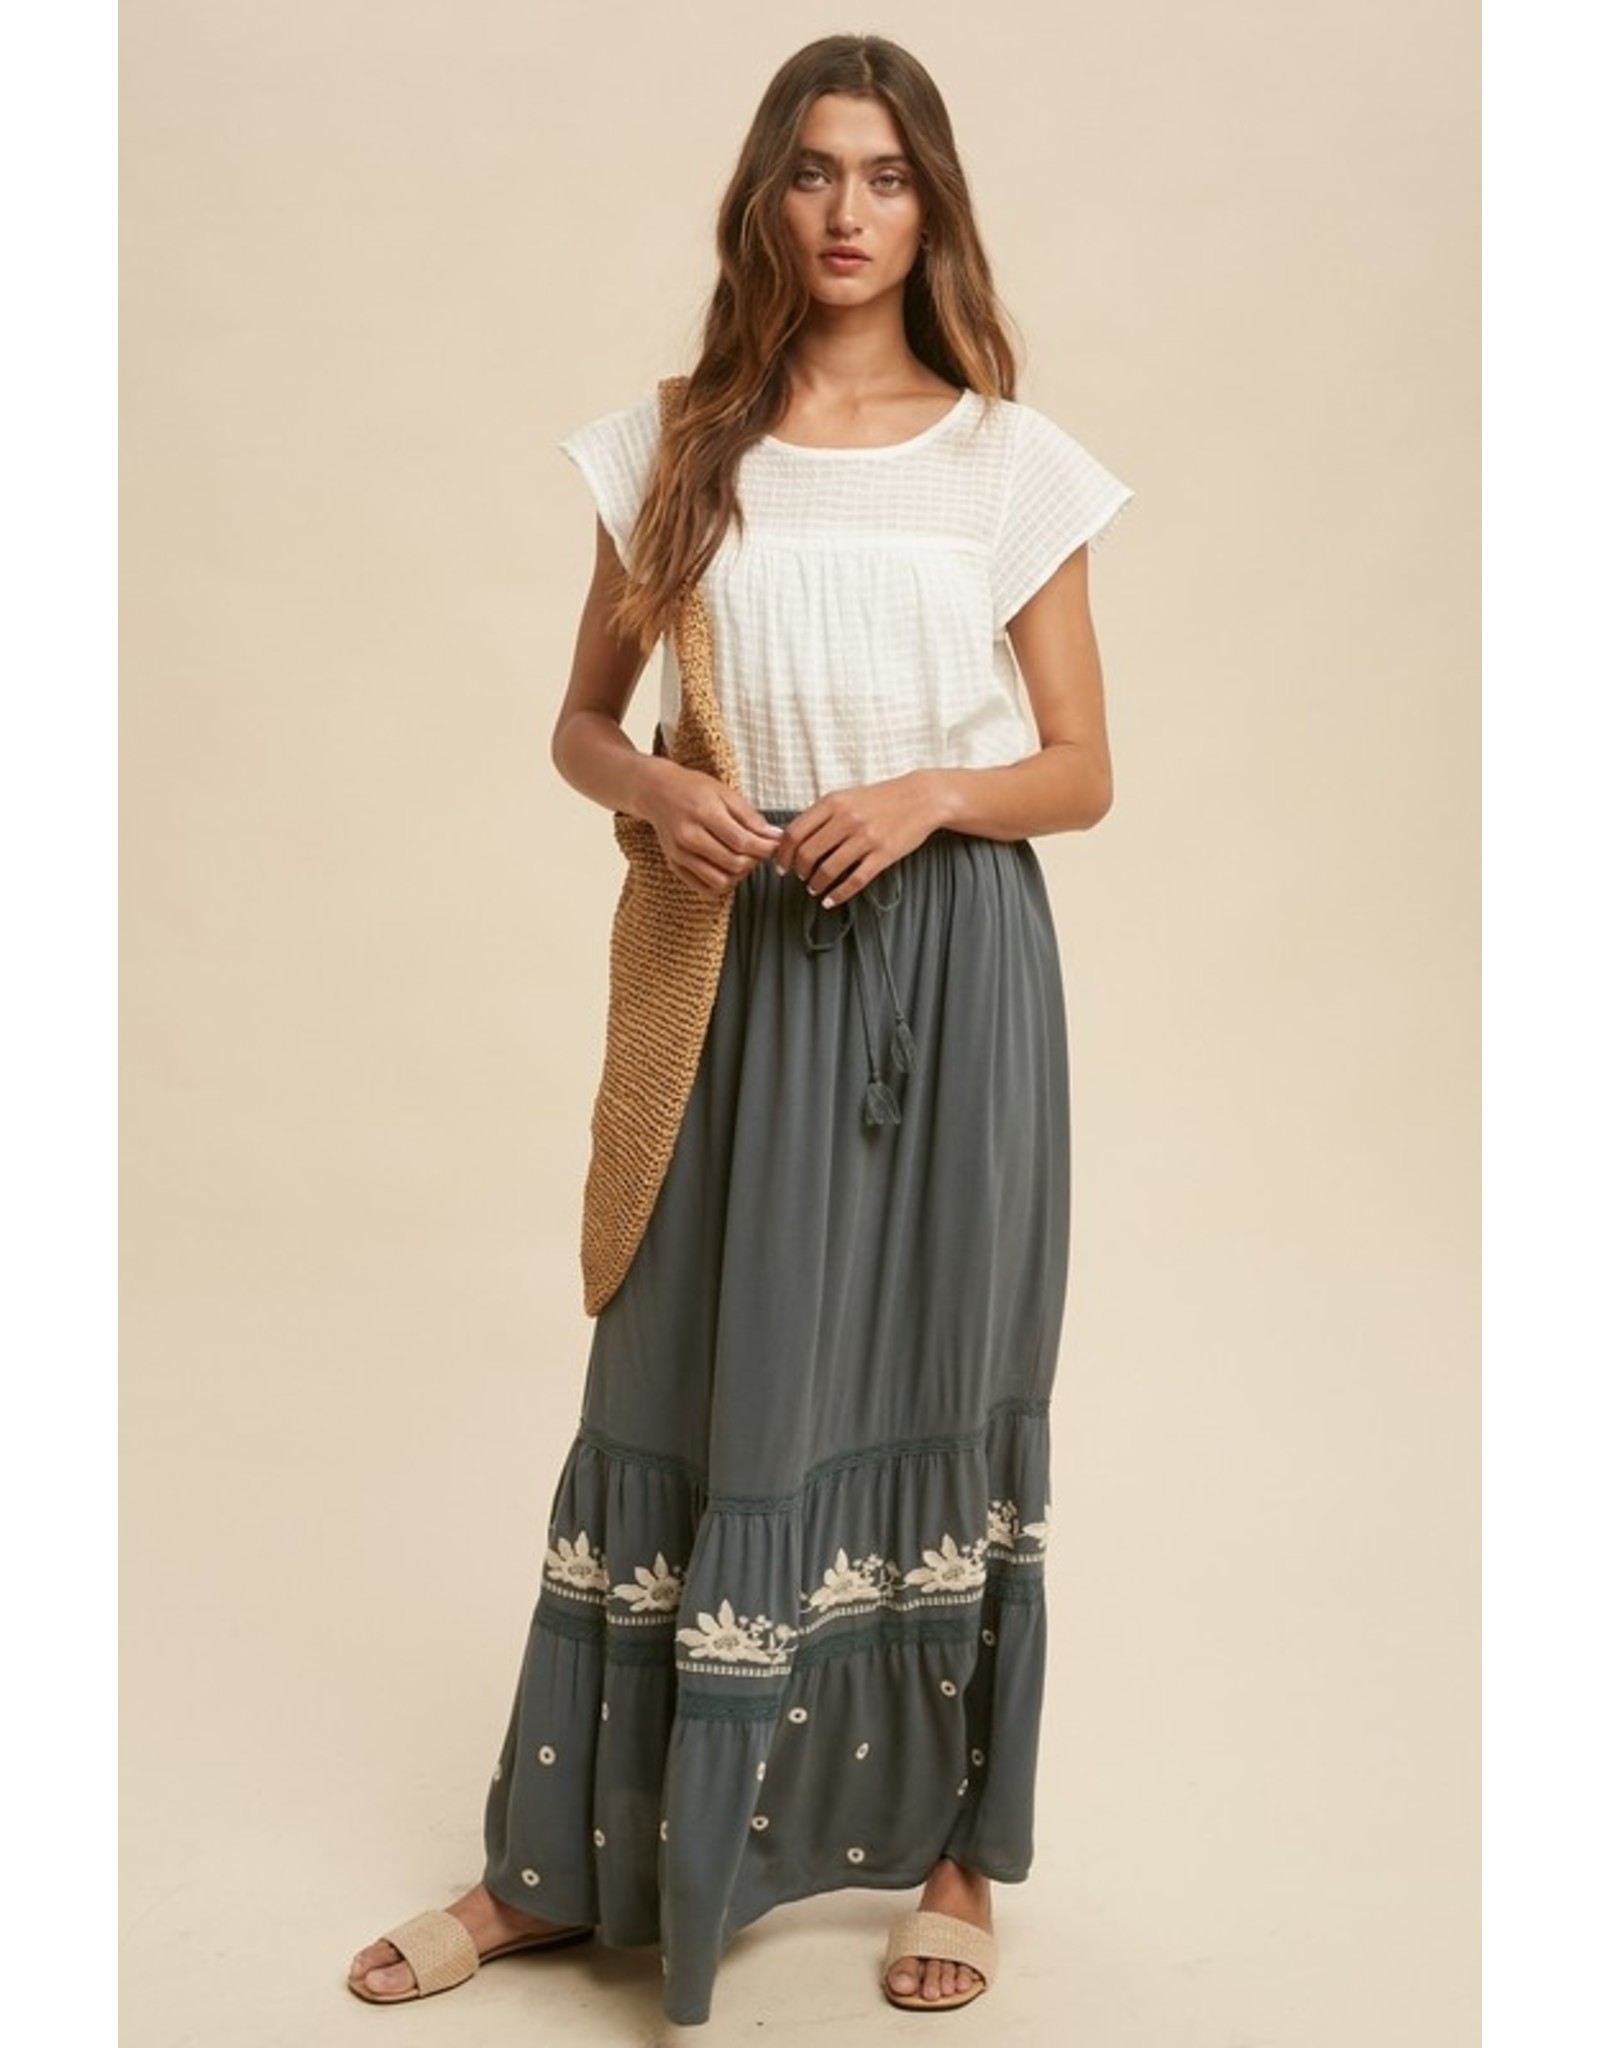 In Loom Tiered Embroidered Maxi Skirt